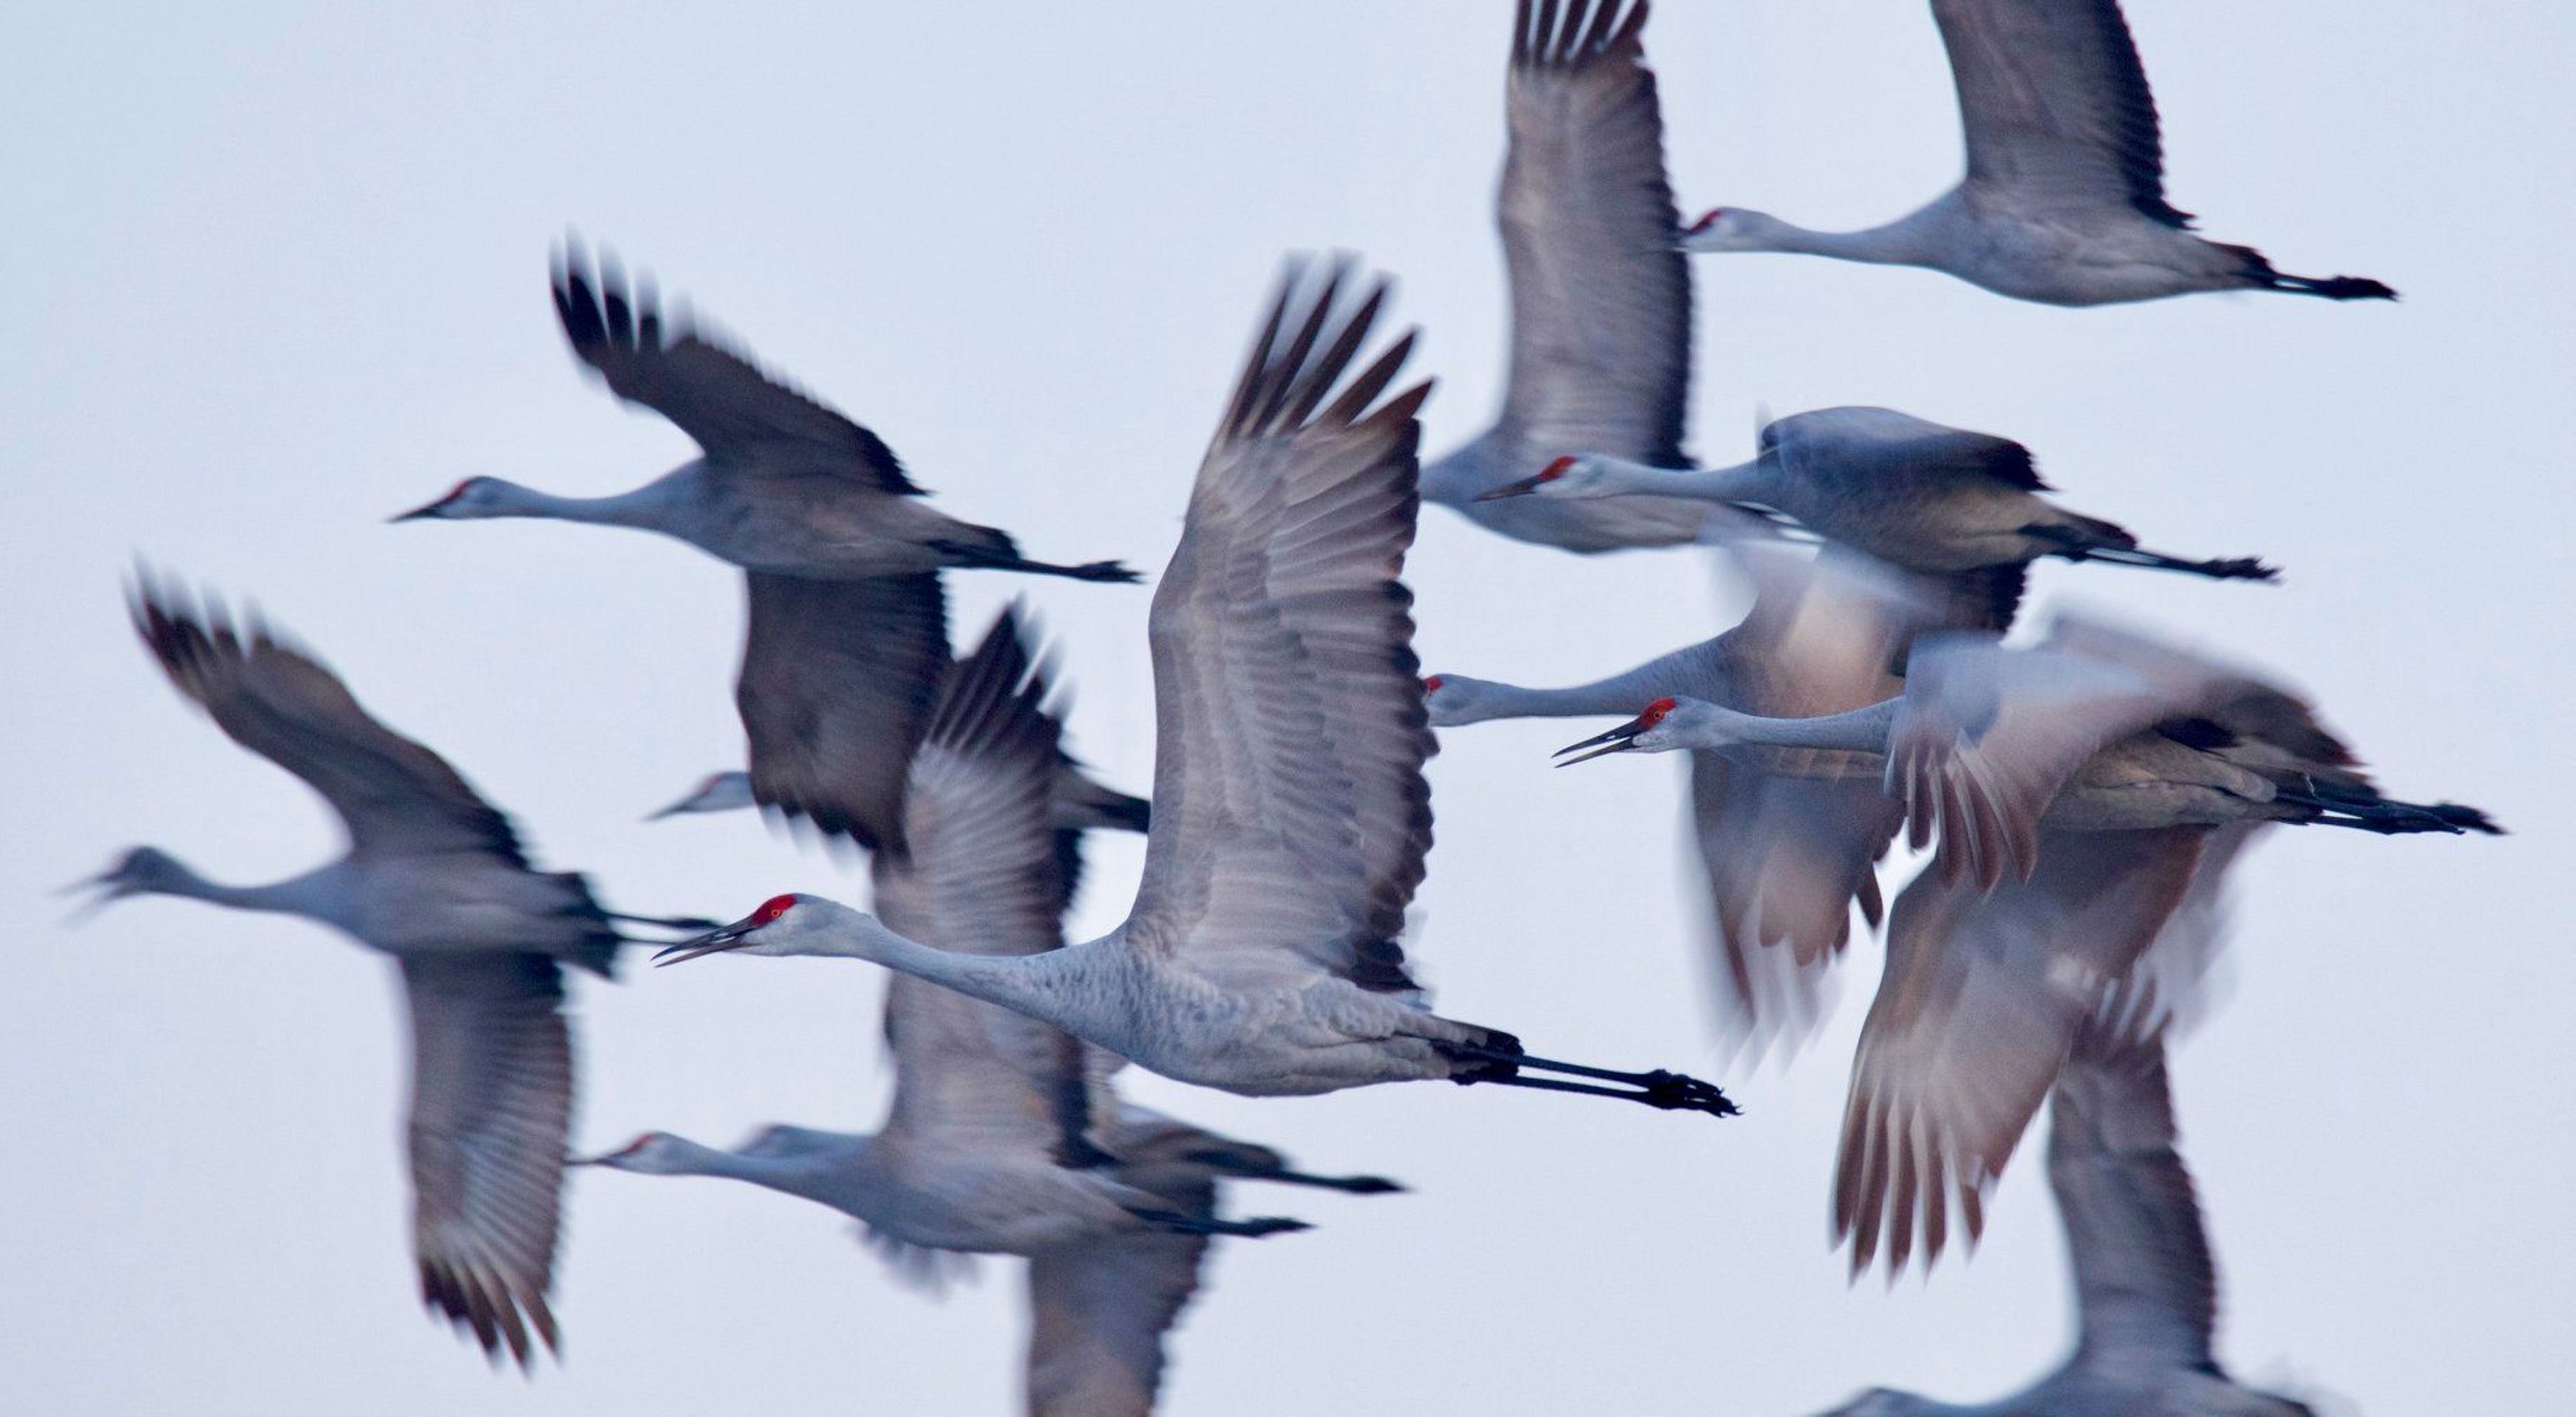 Nebraska's Grand Island during the sandhill crane migration. Honorable Mention in the 2019 Staff Photo Contest. 